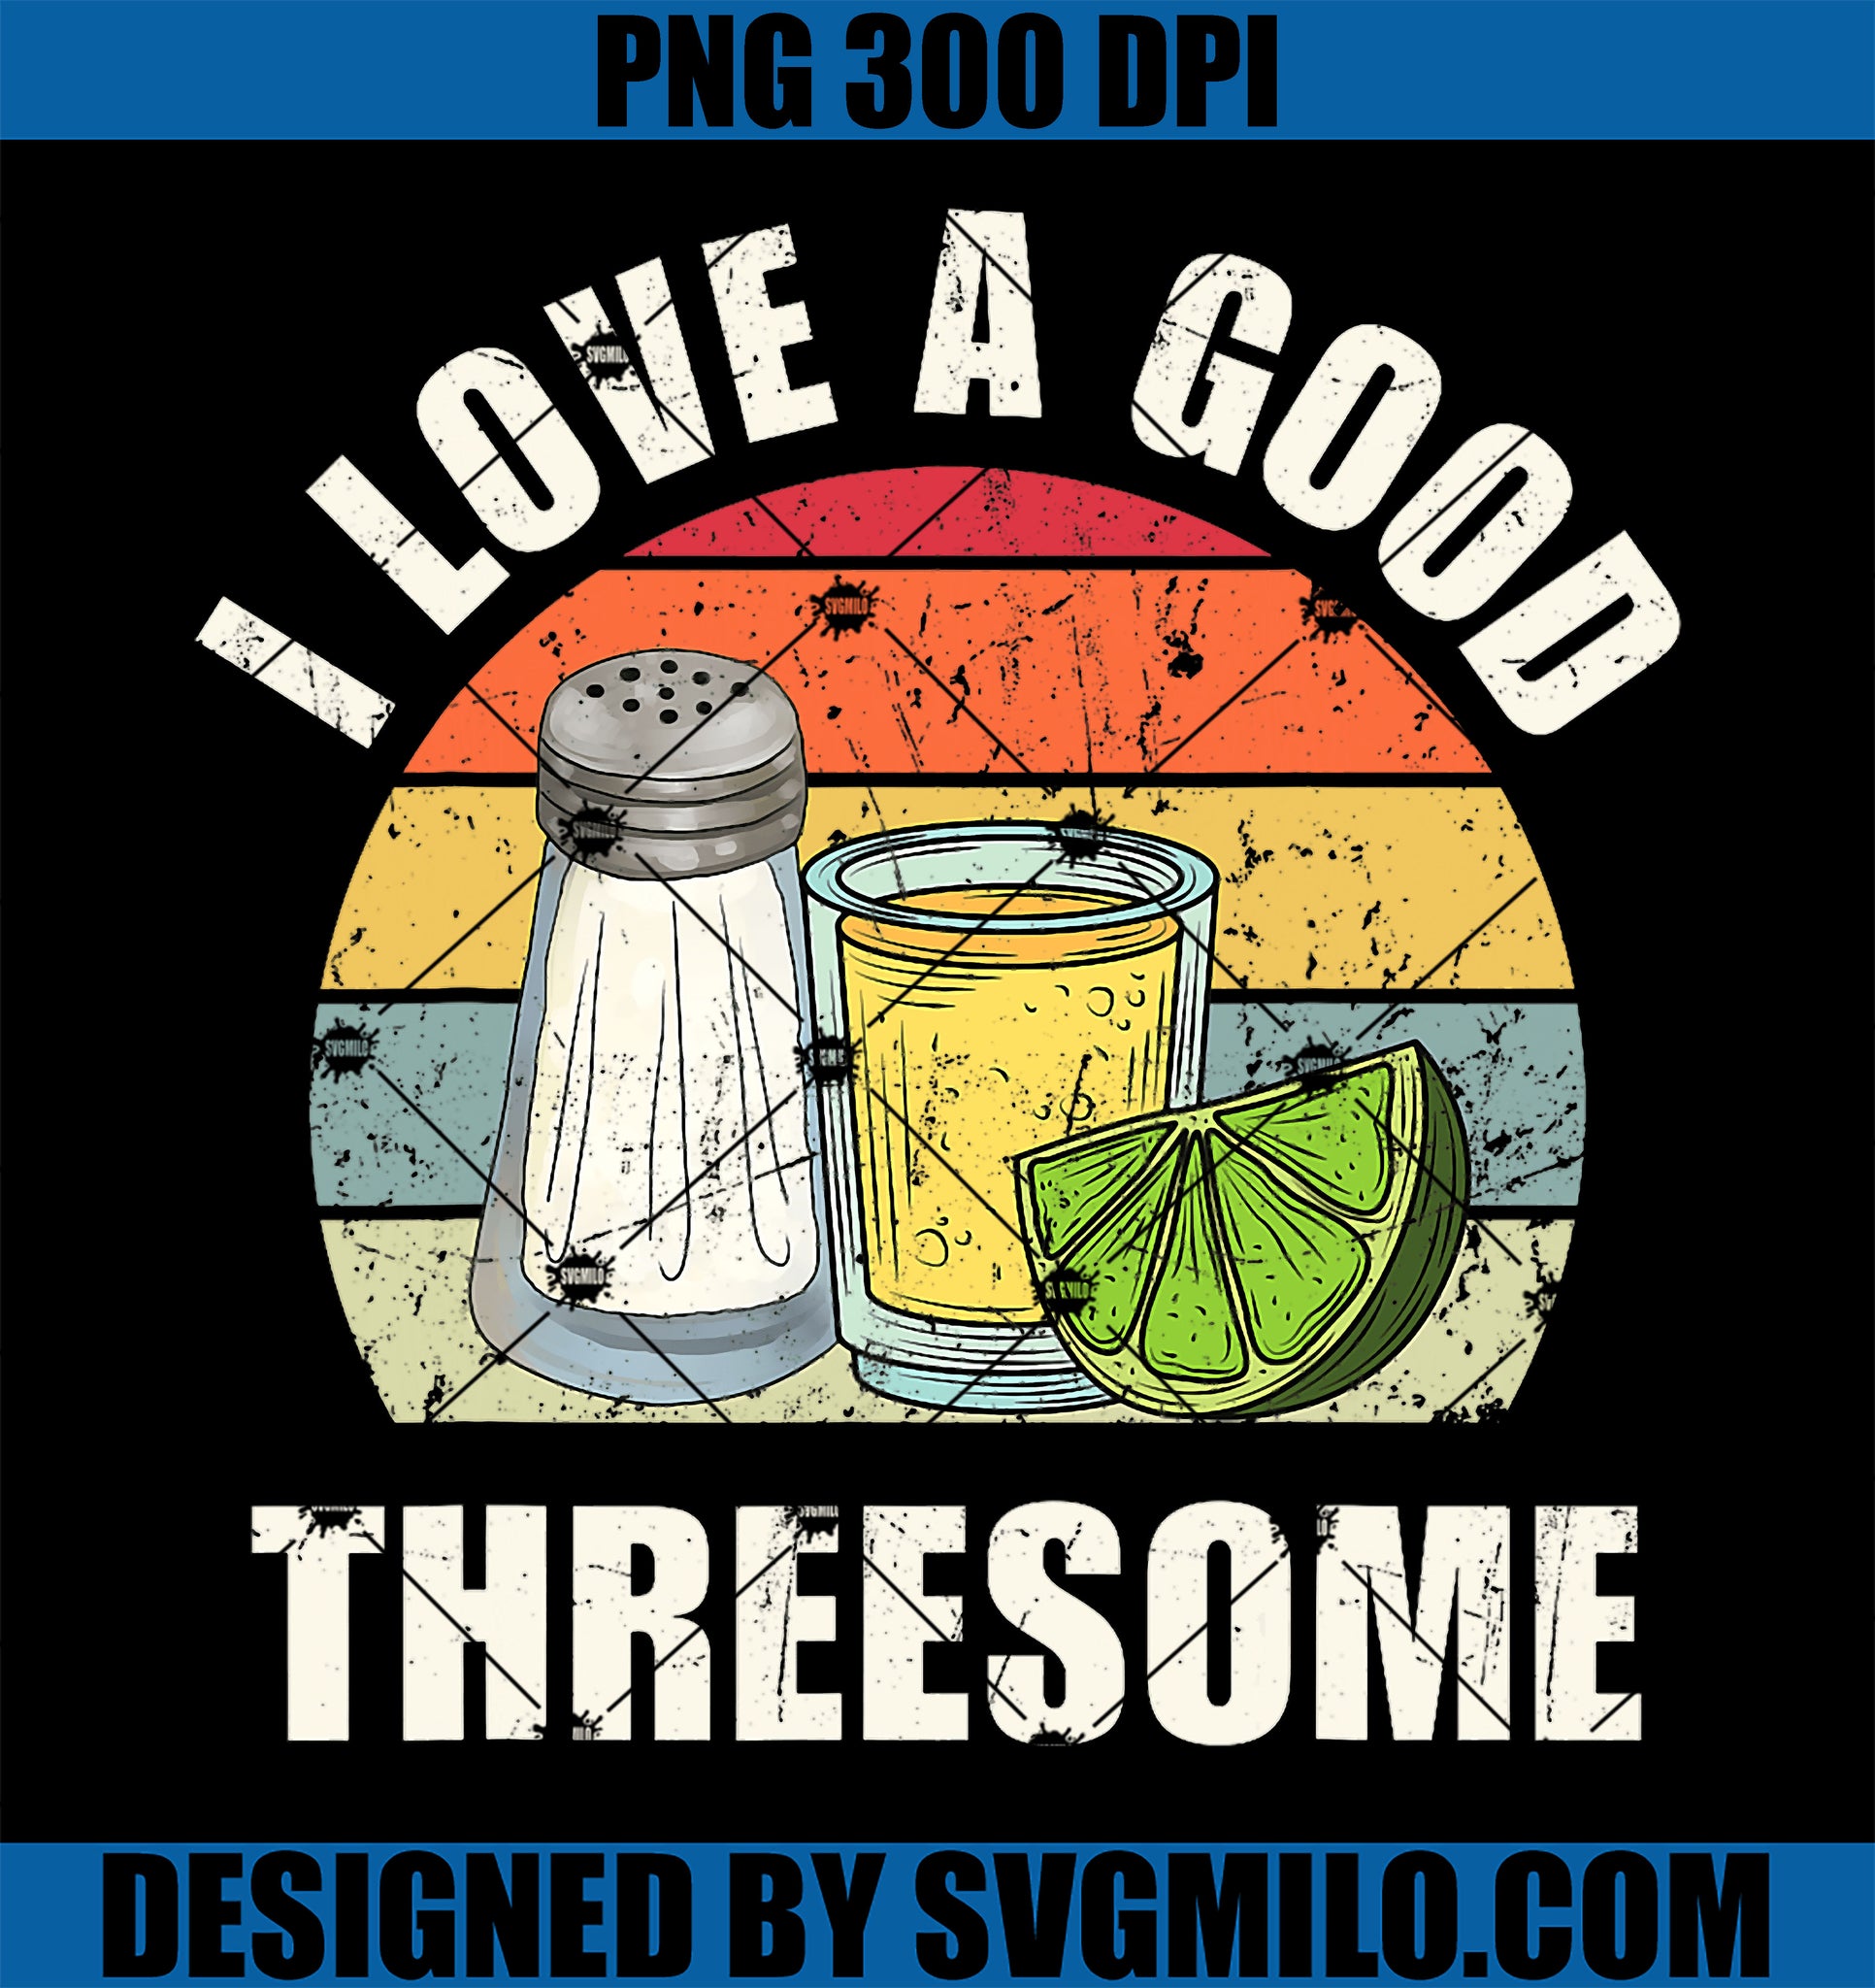 Salt Tequila Lime Love A Good Threesome PNG, Humor Bartender PNG